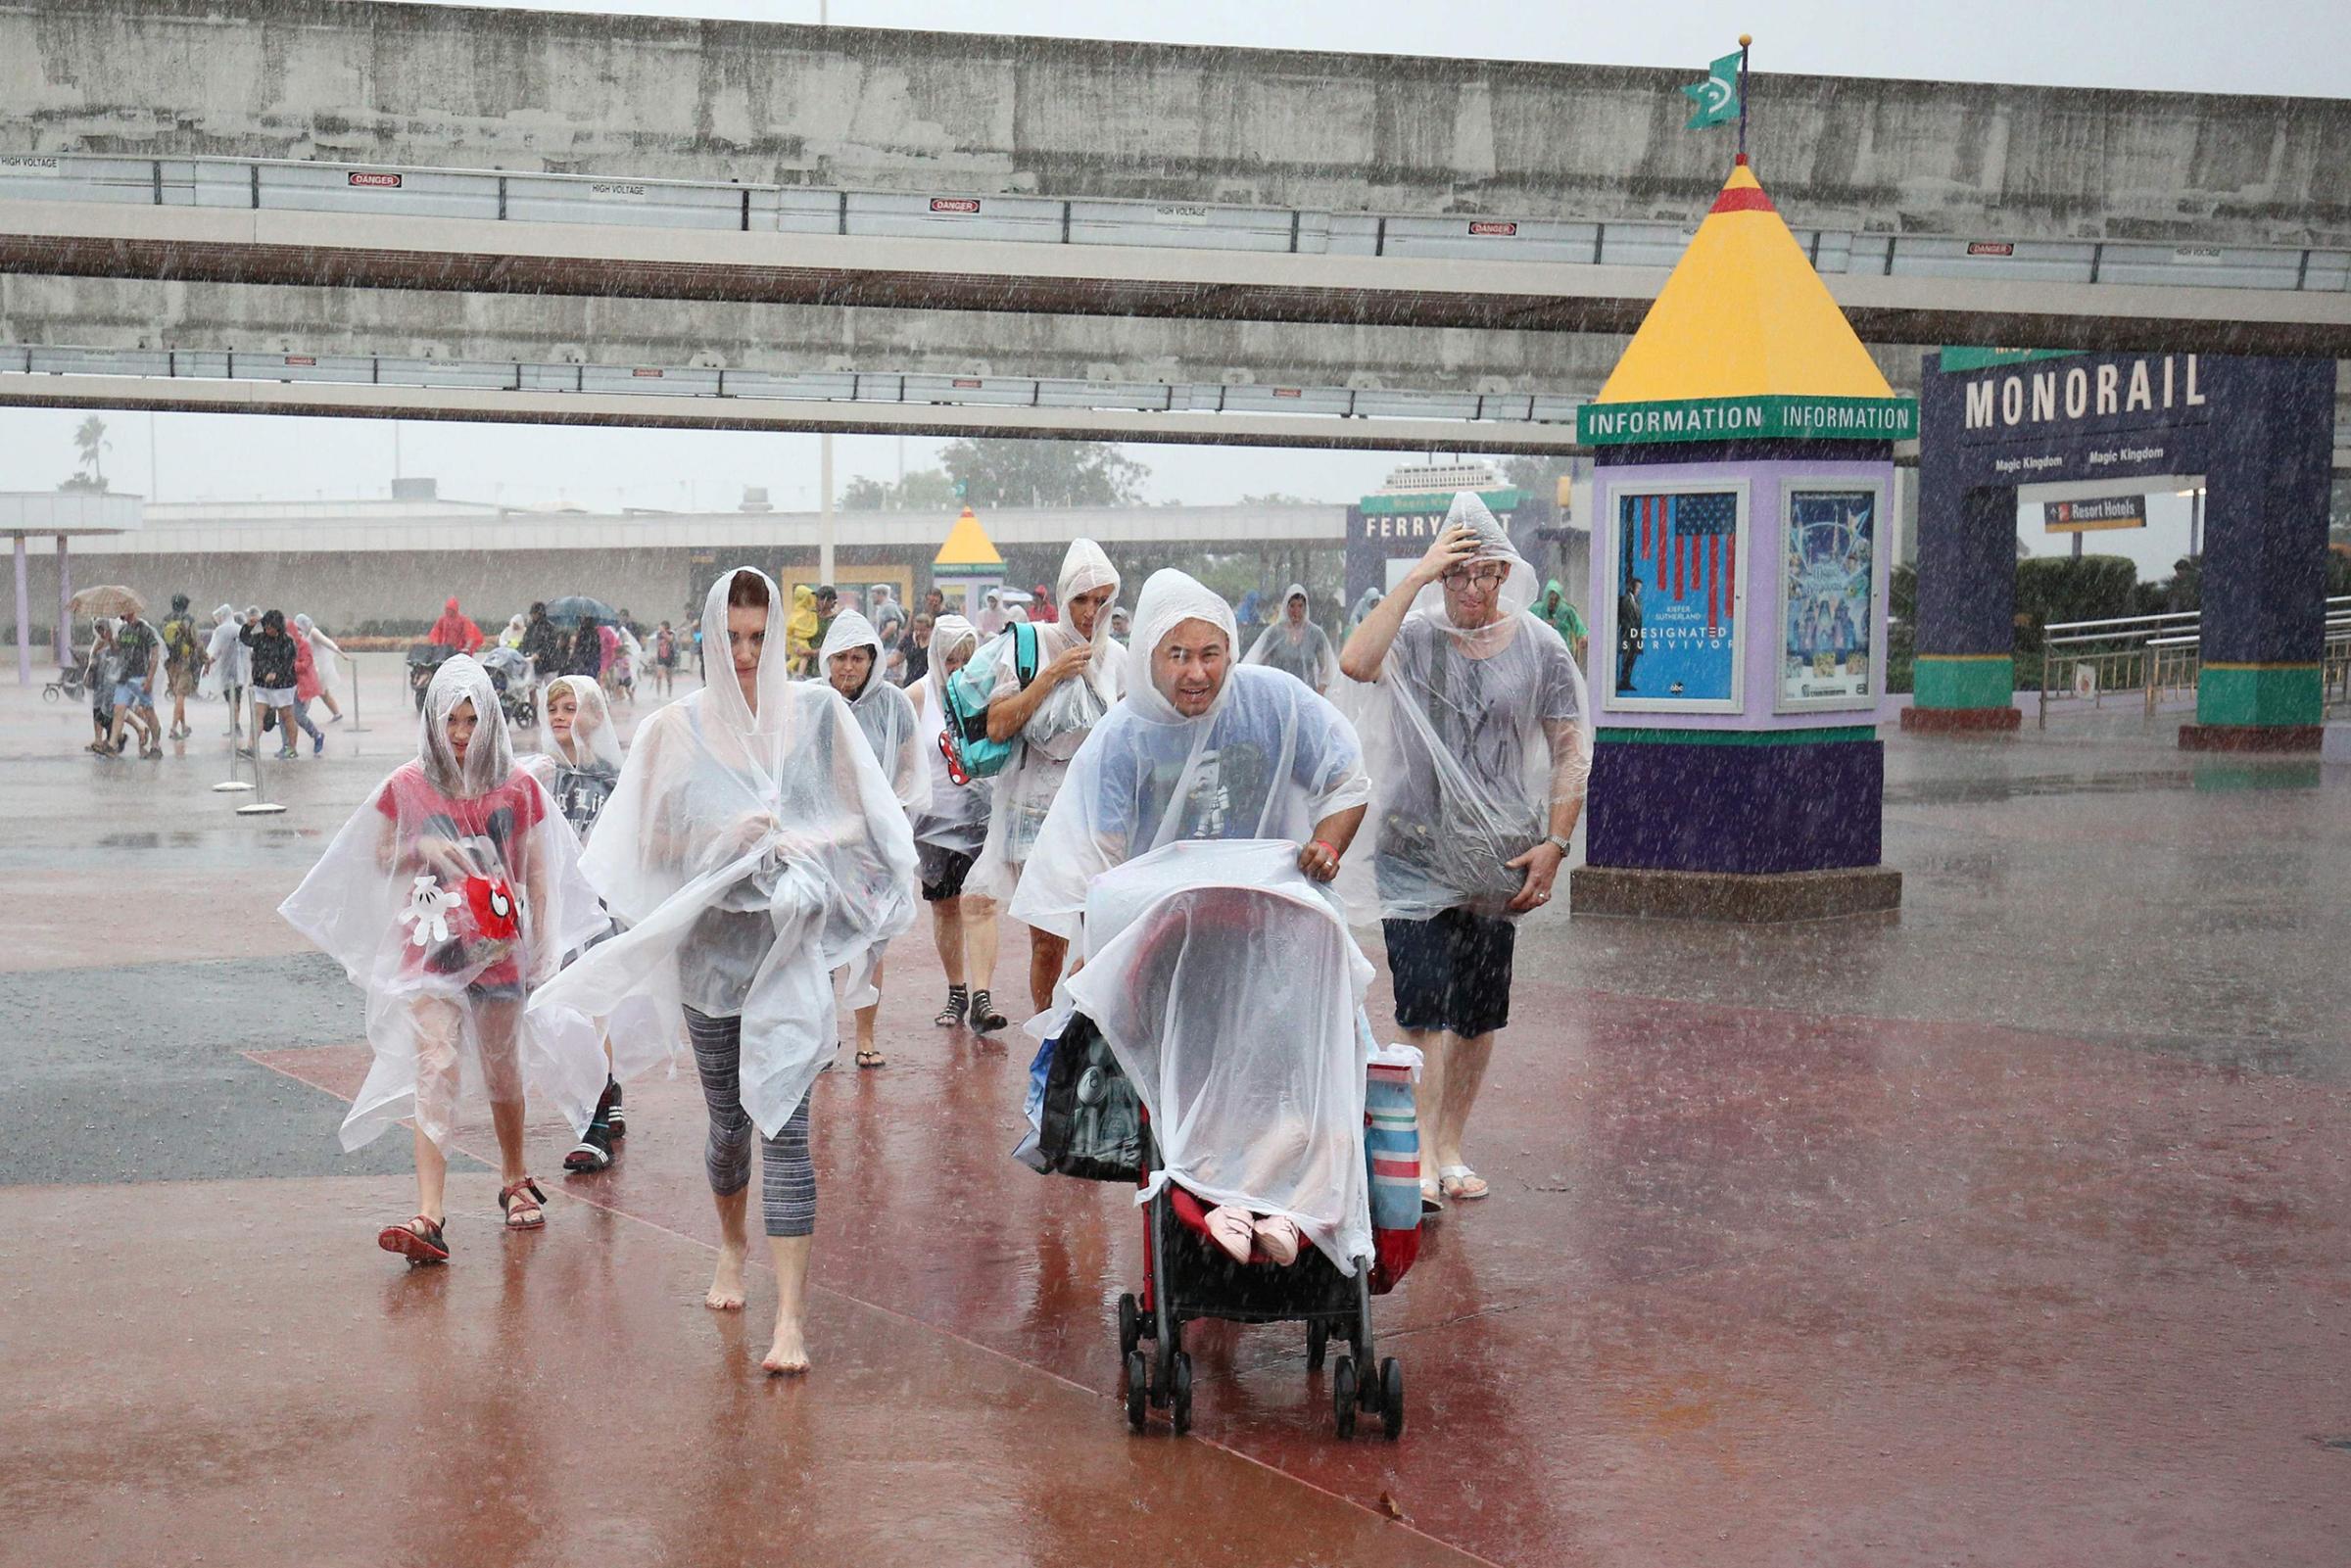 People leave Disney's Magic Kingdom theme park, in heavy rain, after it closed in Orlando, Fla., in preparation for the landfall of Hurricane Matthew, on Oct. 6, 2016.